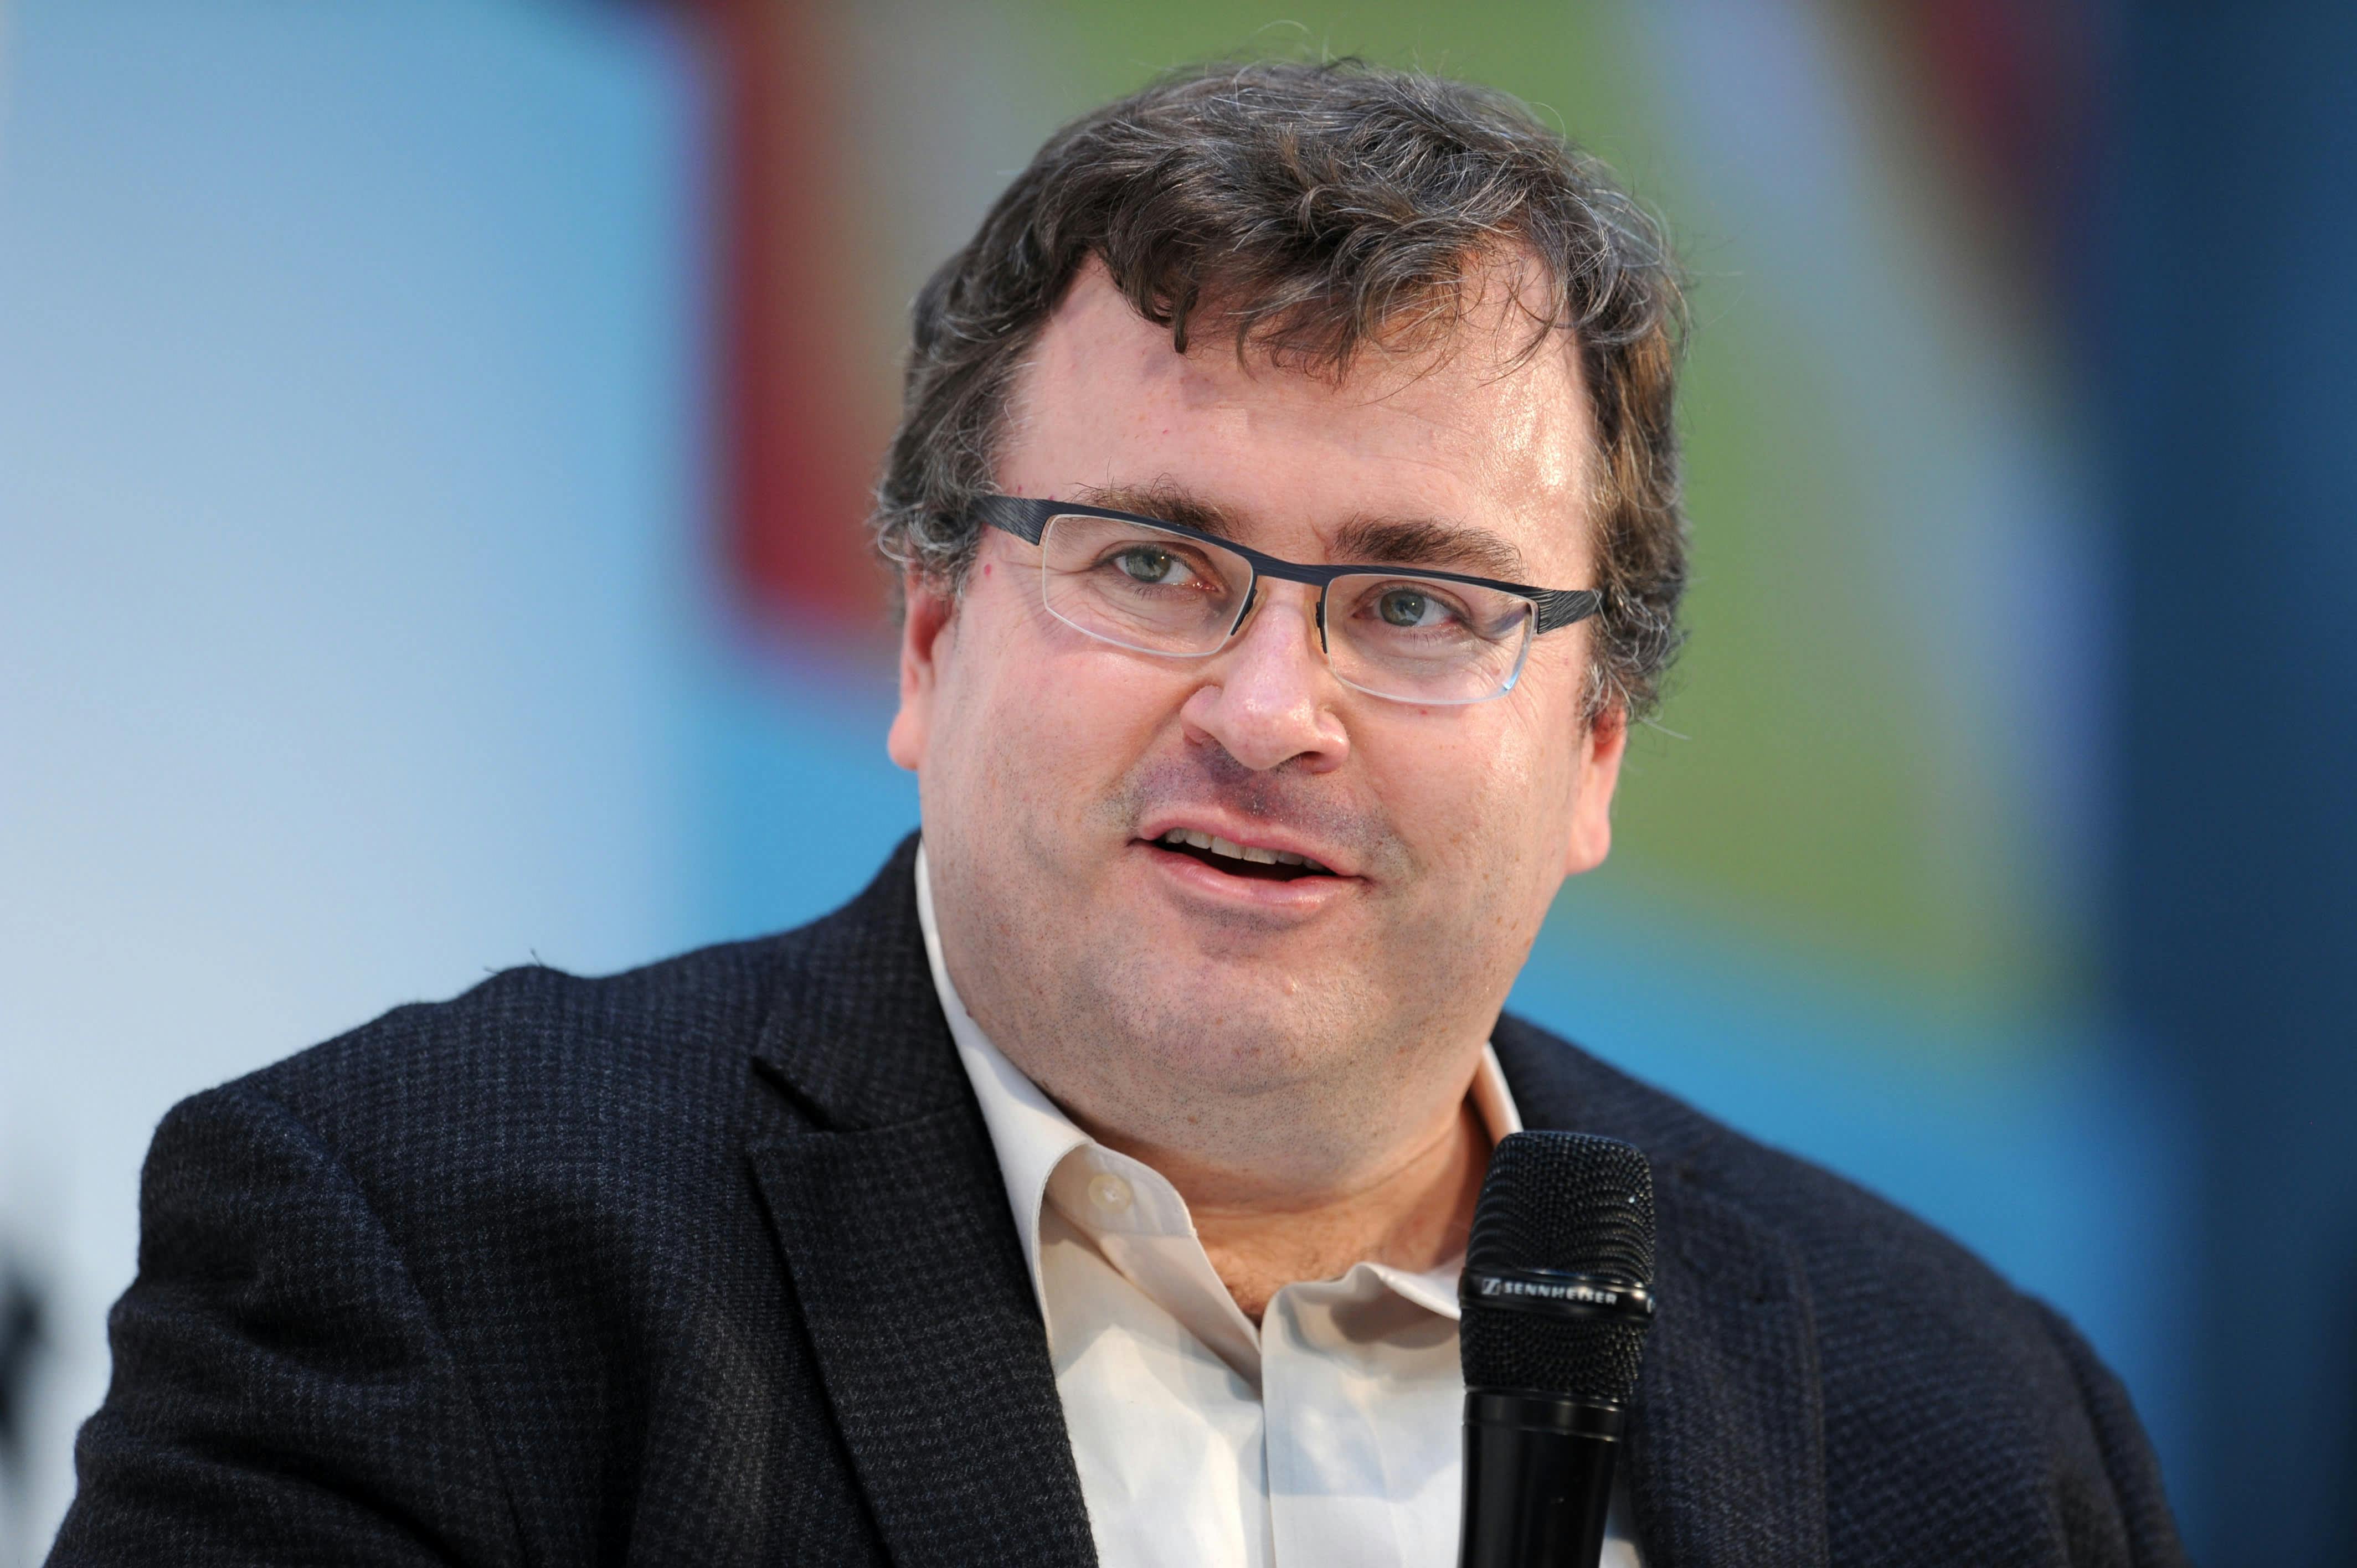 REID HOFFMAN: THE CO-FOUNDER AND EXECUTIVE CHAIRMAN OF LINKEDIN